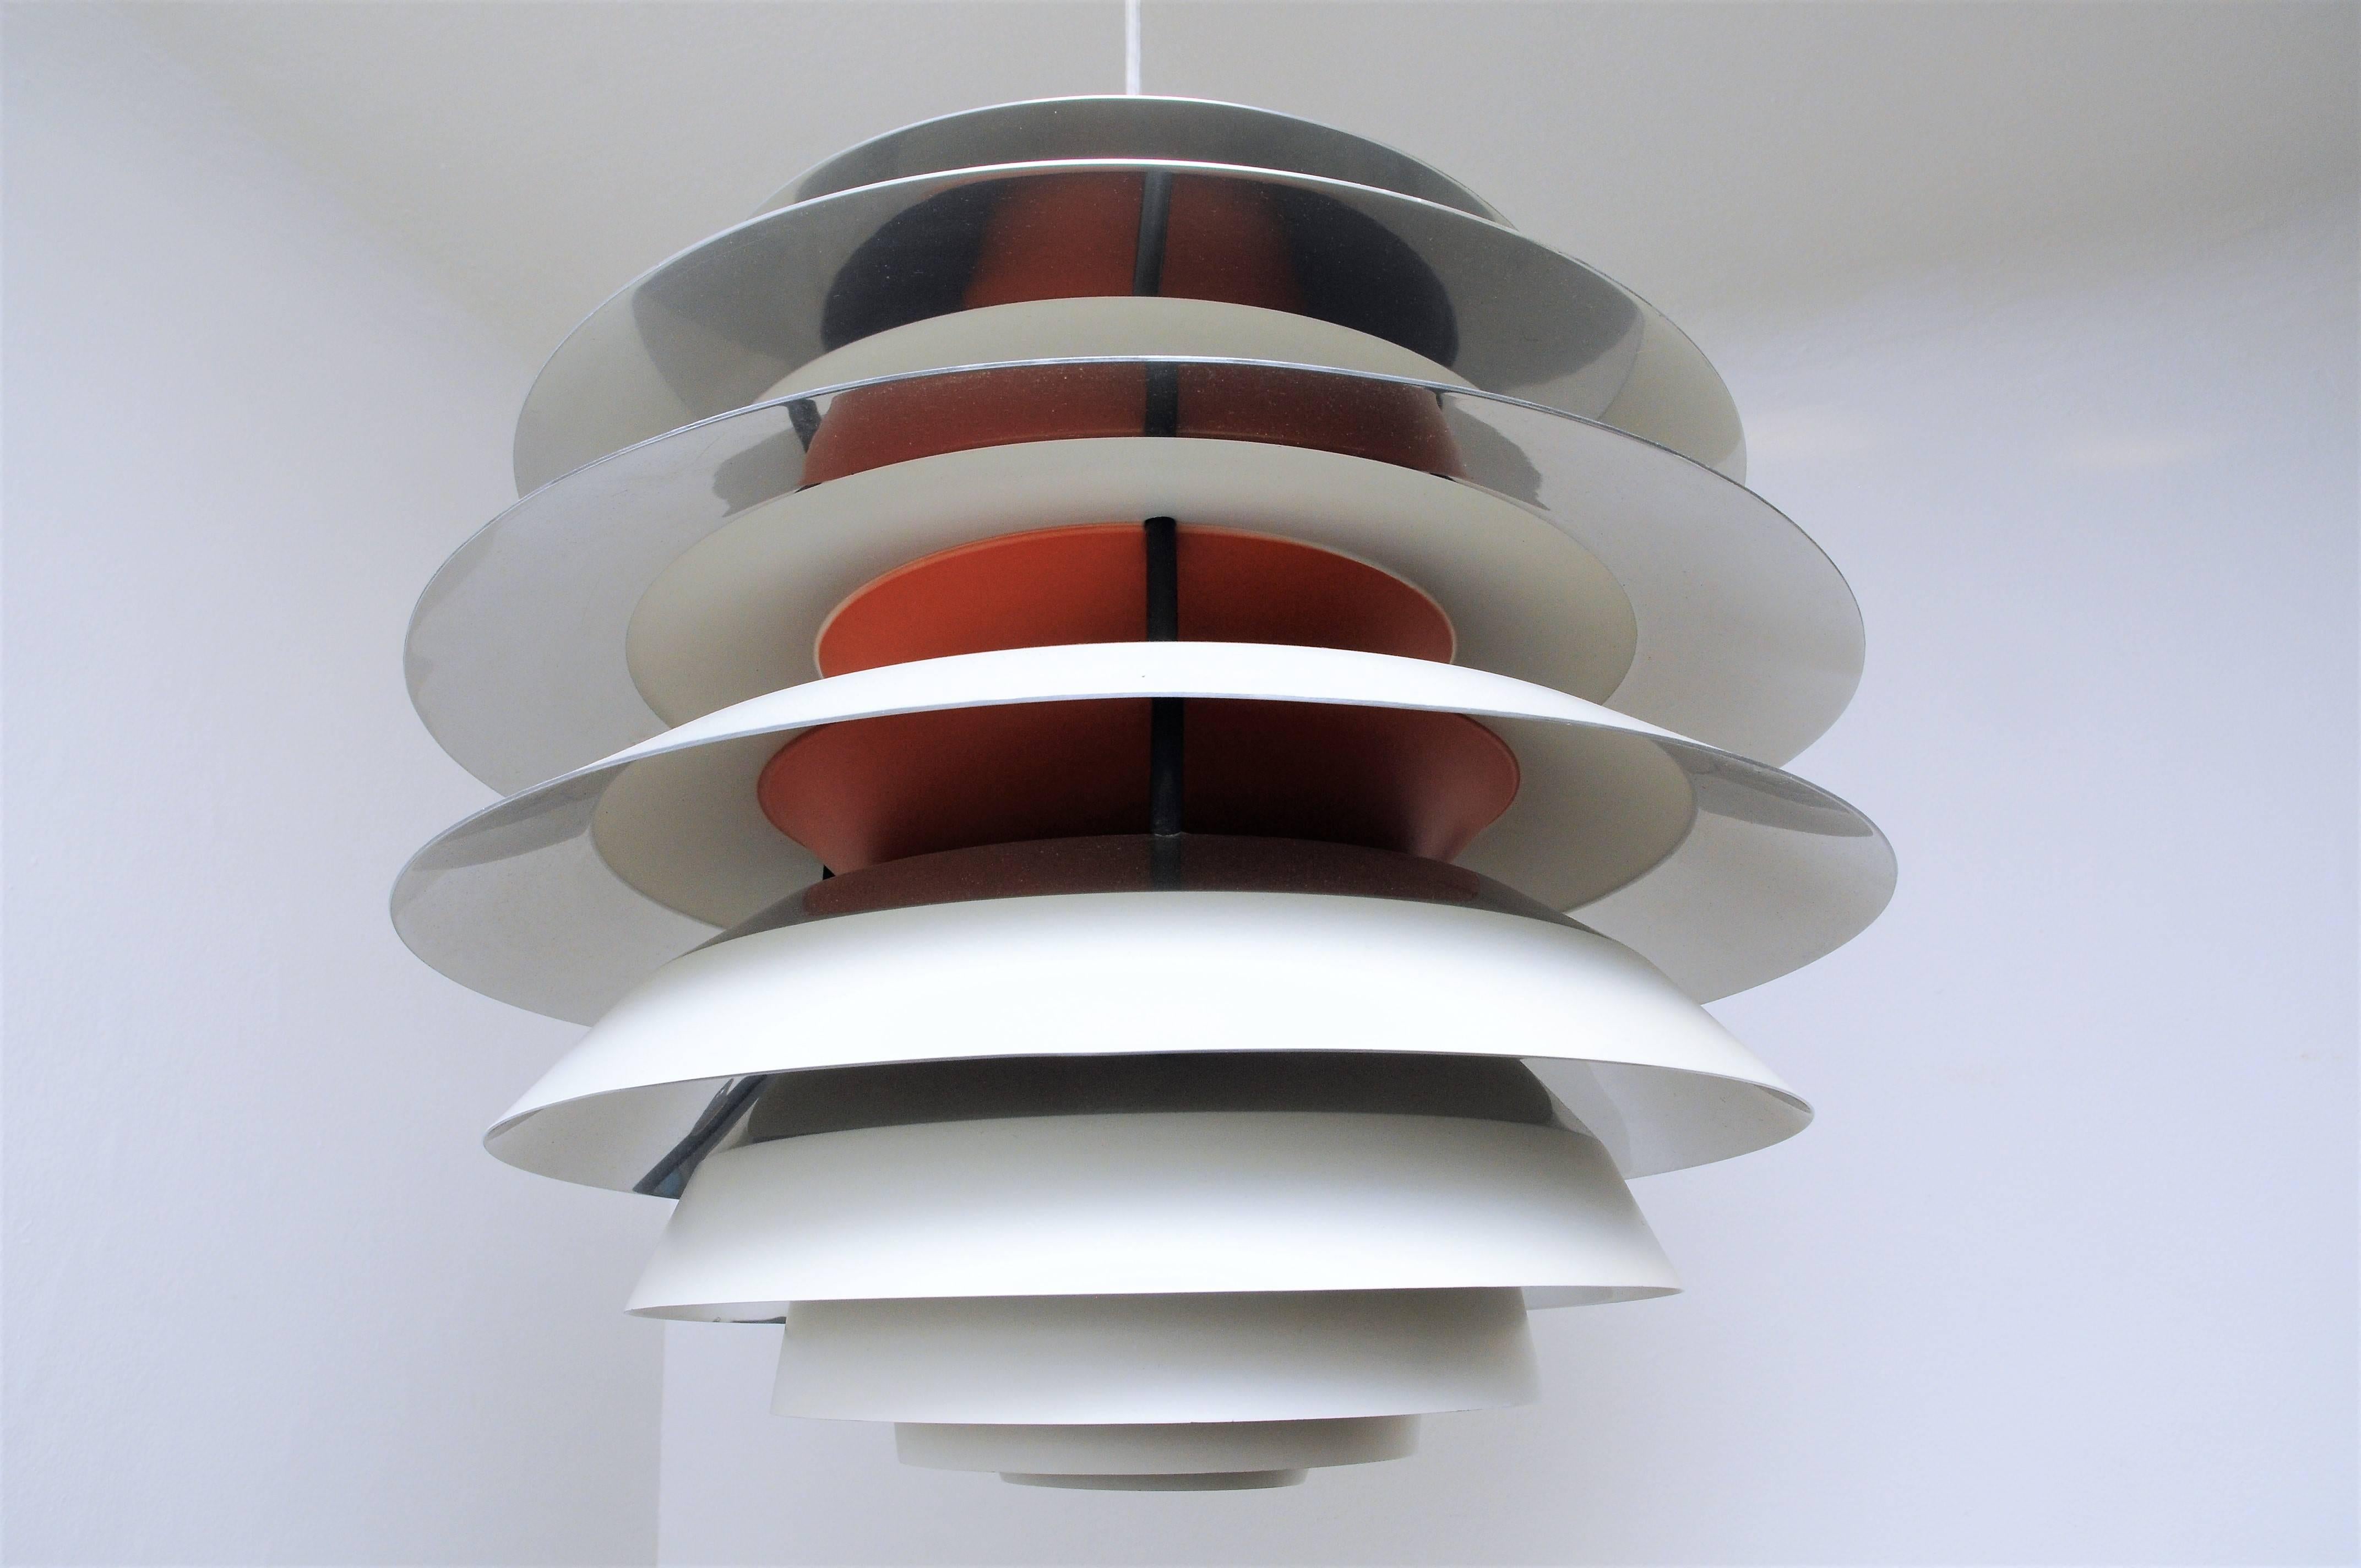 This model PH Kontrast pendant is composed of then shades. Each shade has four different surfaces which are painted in white, blue and red and one polished. The tubular core is adjustable in order to regulate contrast lighting. 
The piece was